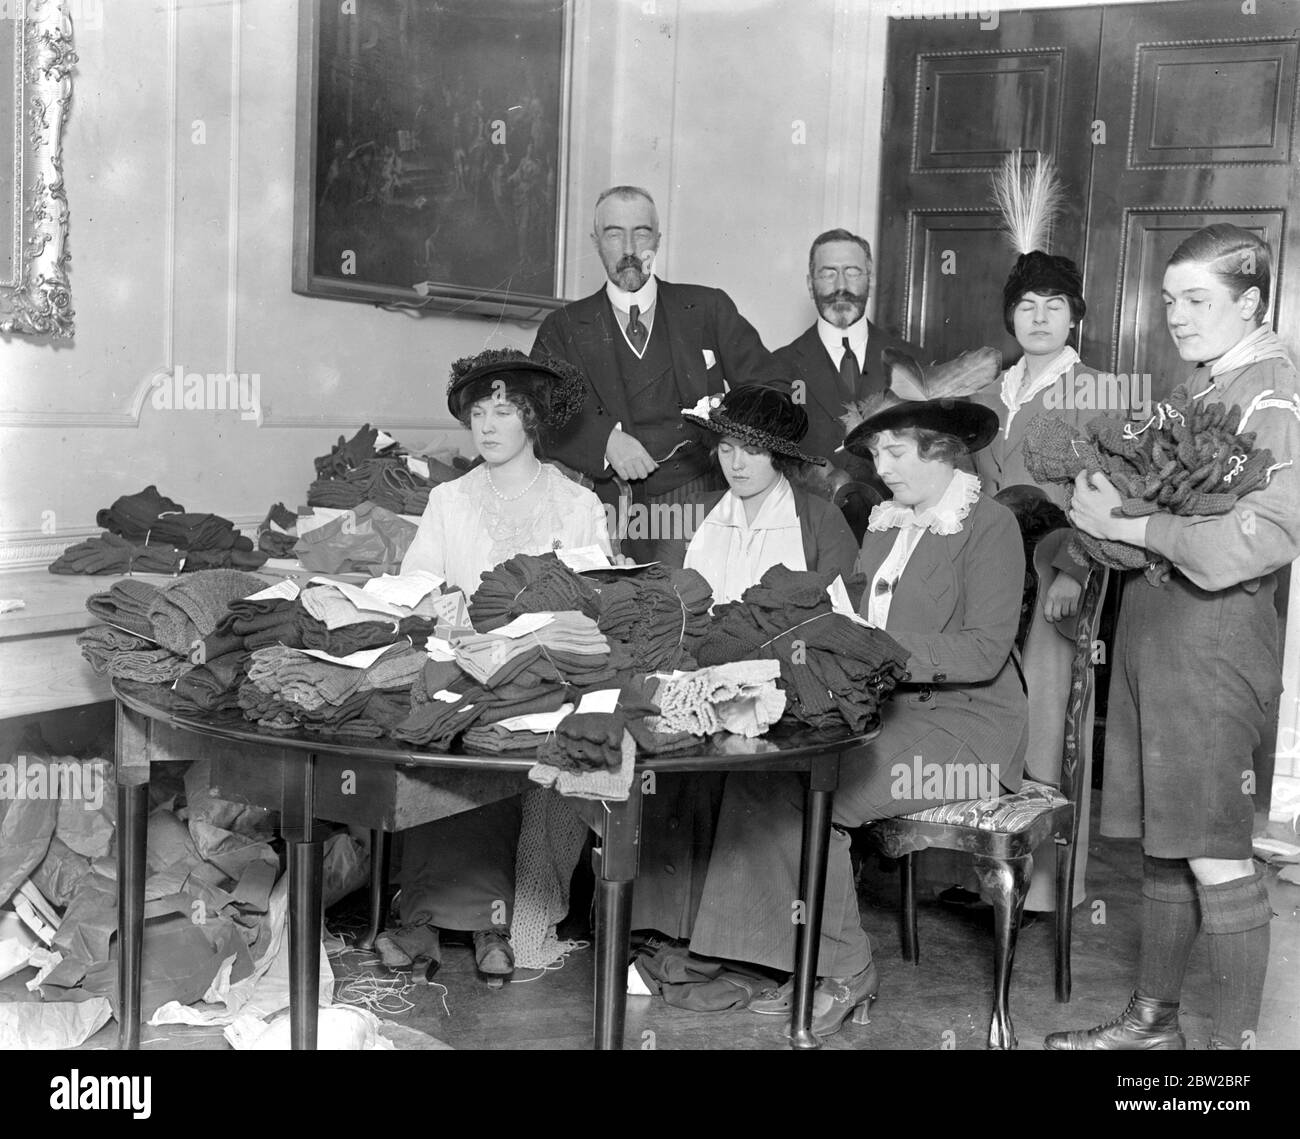 Grand Duke Michael, Countess Zia and Nada Torby collecting funds for scarves and socks for soldiers. 1914 - 1918 Stock Photo